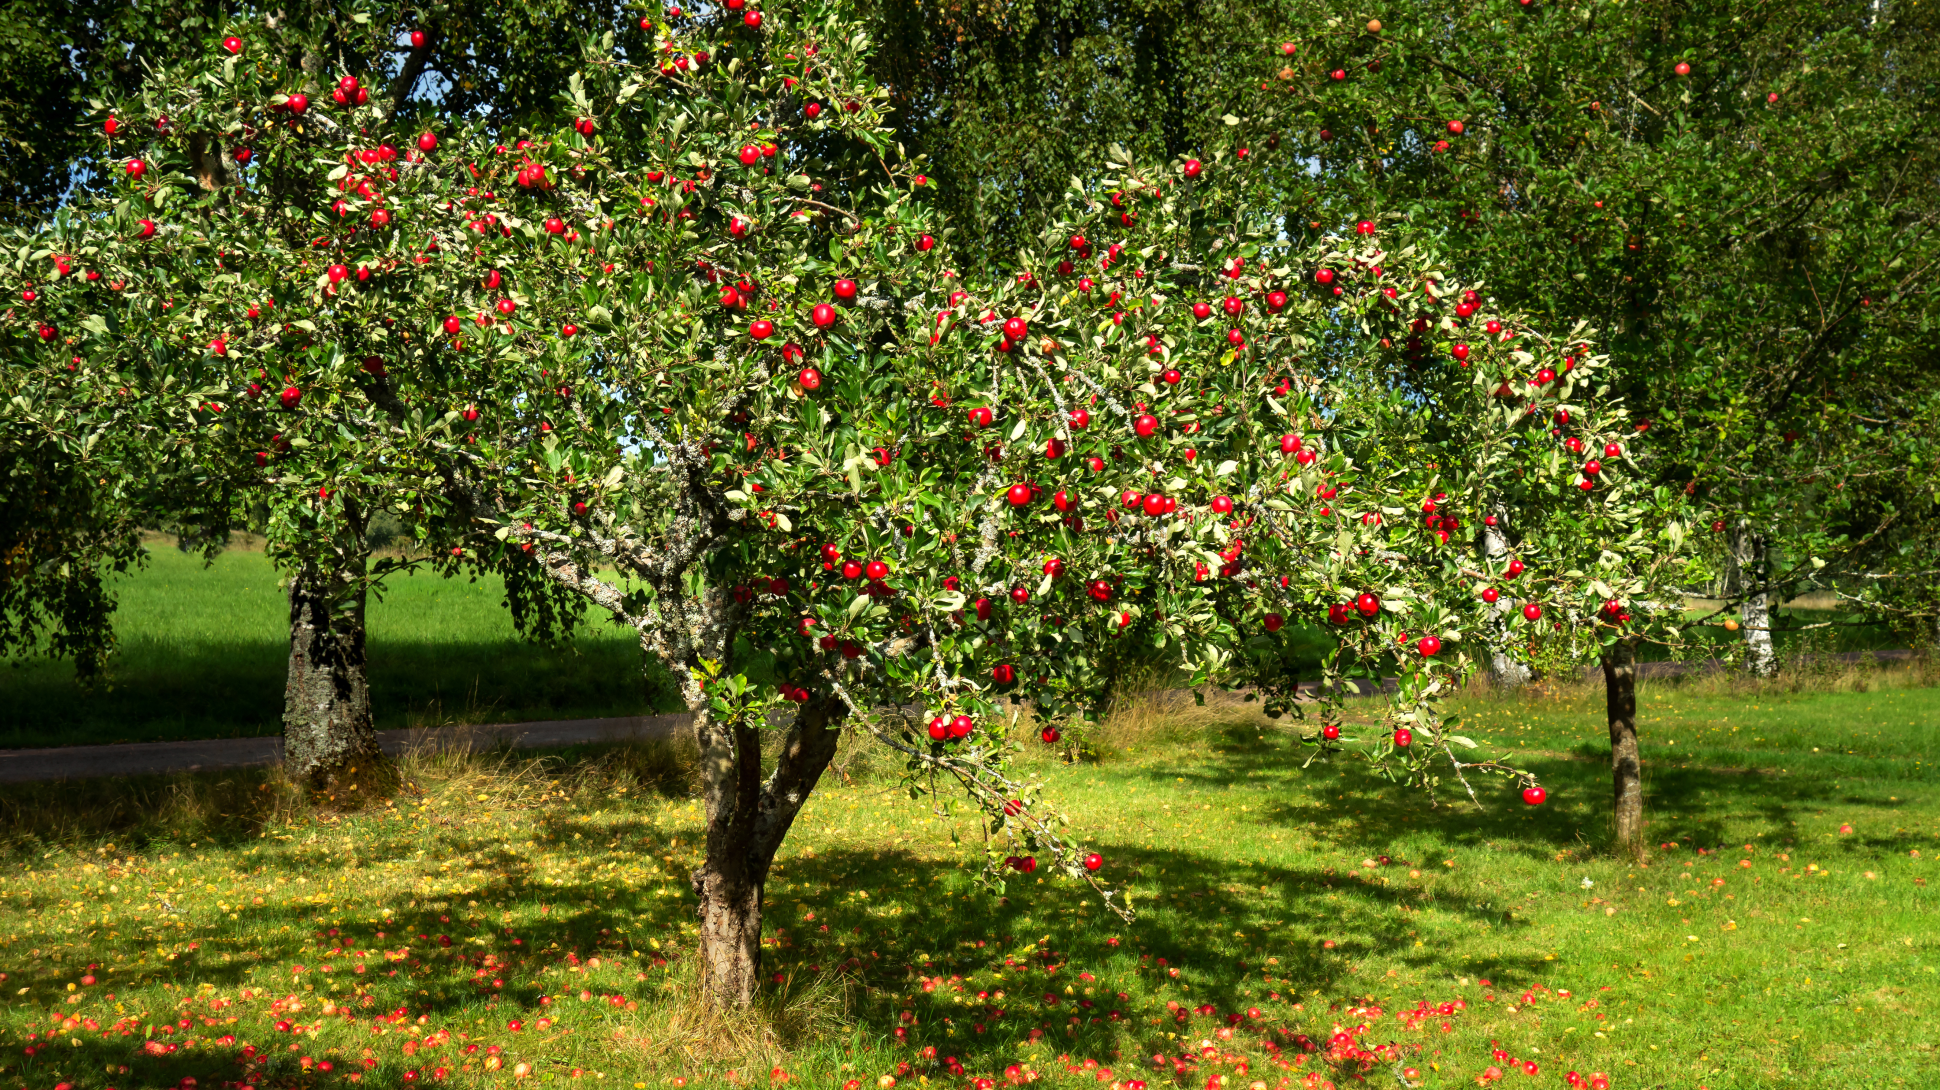 A wide spreading tree with the most red apples you could imagine